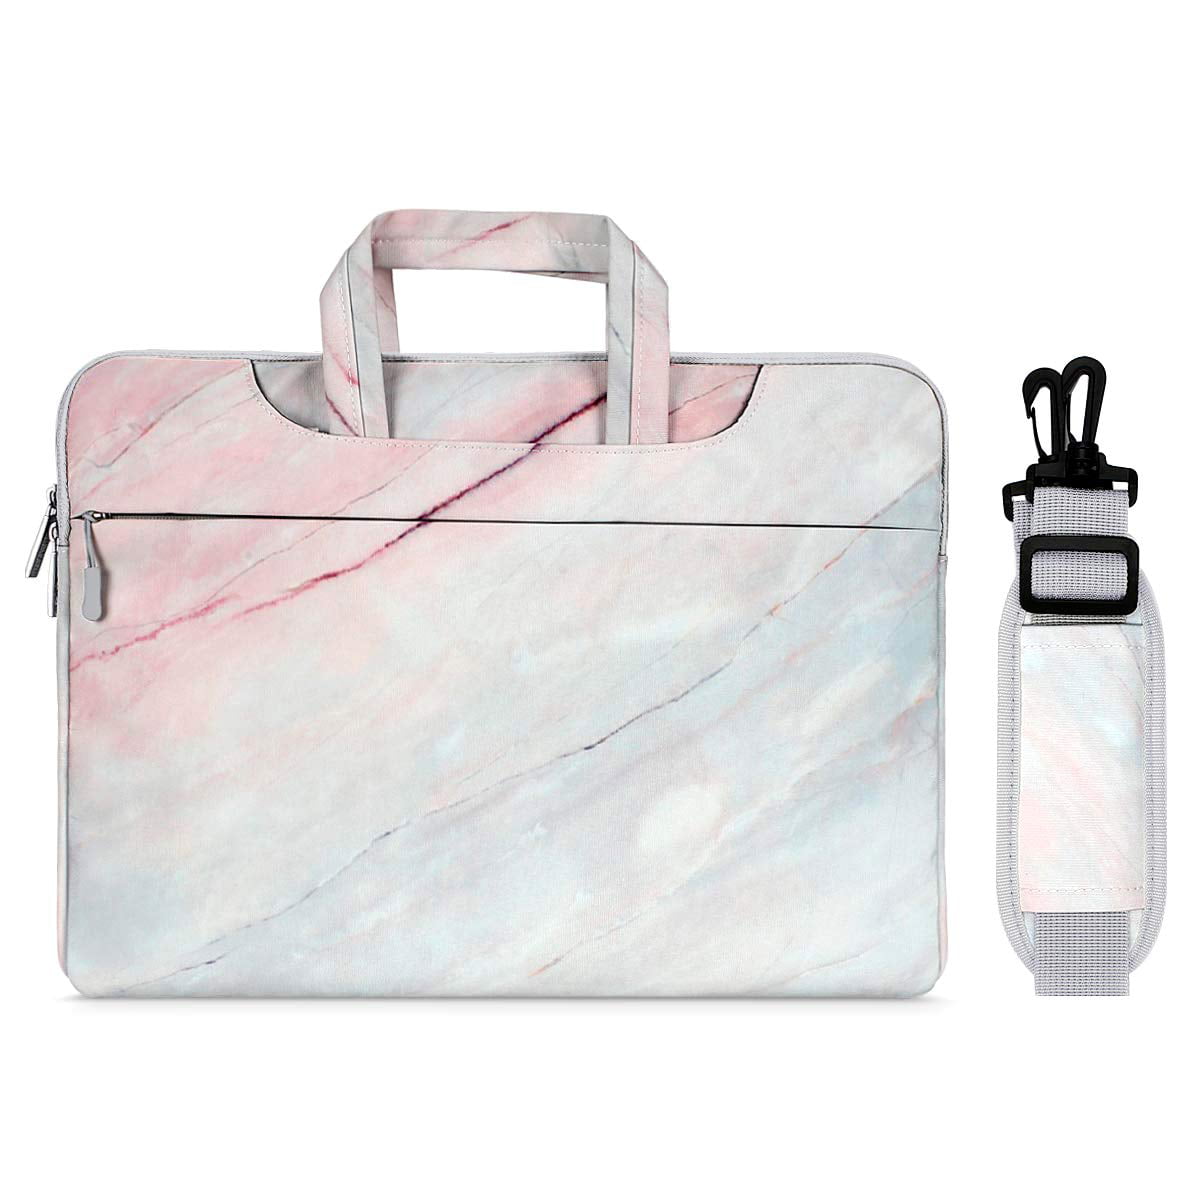 Ultraportable Protective Canvas Marble Pattern Carrying Handbag Briefcase Sleeve Case Cover Mosiso Laptop Shoulder Bag Compatible 13-13.3 Inch MacBook Pro White MacBook Air Notebook Computer 